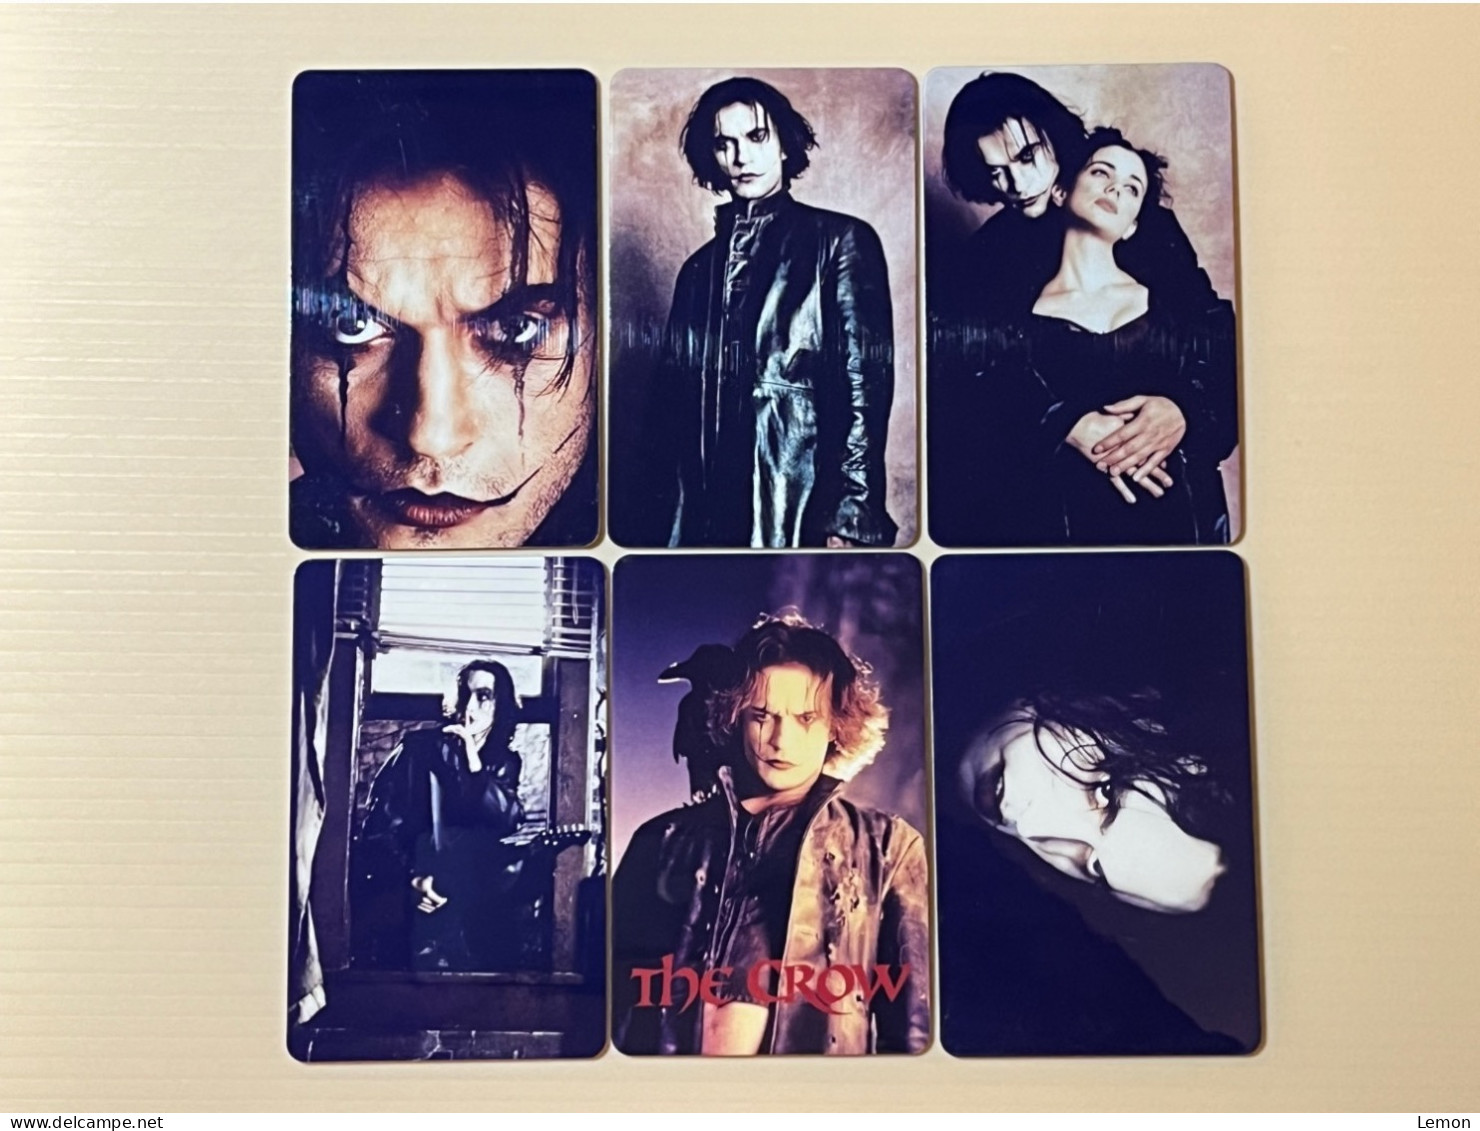 Mint USA UNITED STATES America Prepaid Telecard Phonecard, The Crow, Set Of 5 Mint Cards & 1 Used Card - Sammlungen